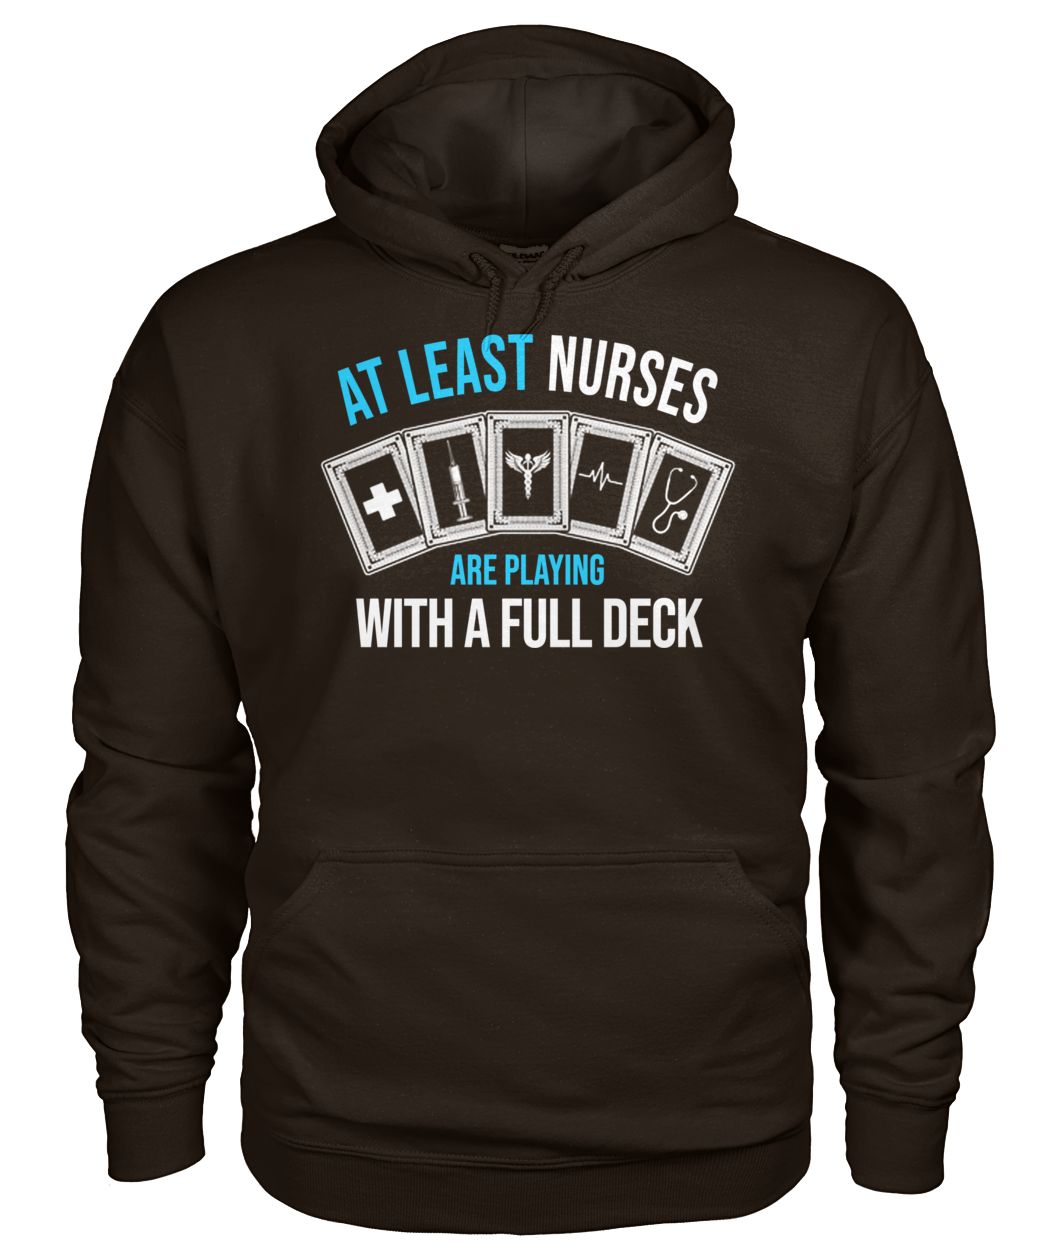 At least nurse are playing with a full deck gildan hoodie